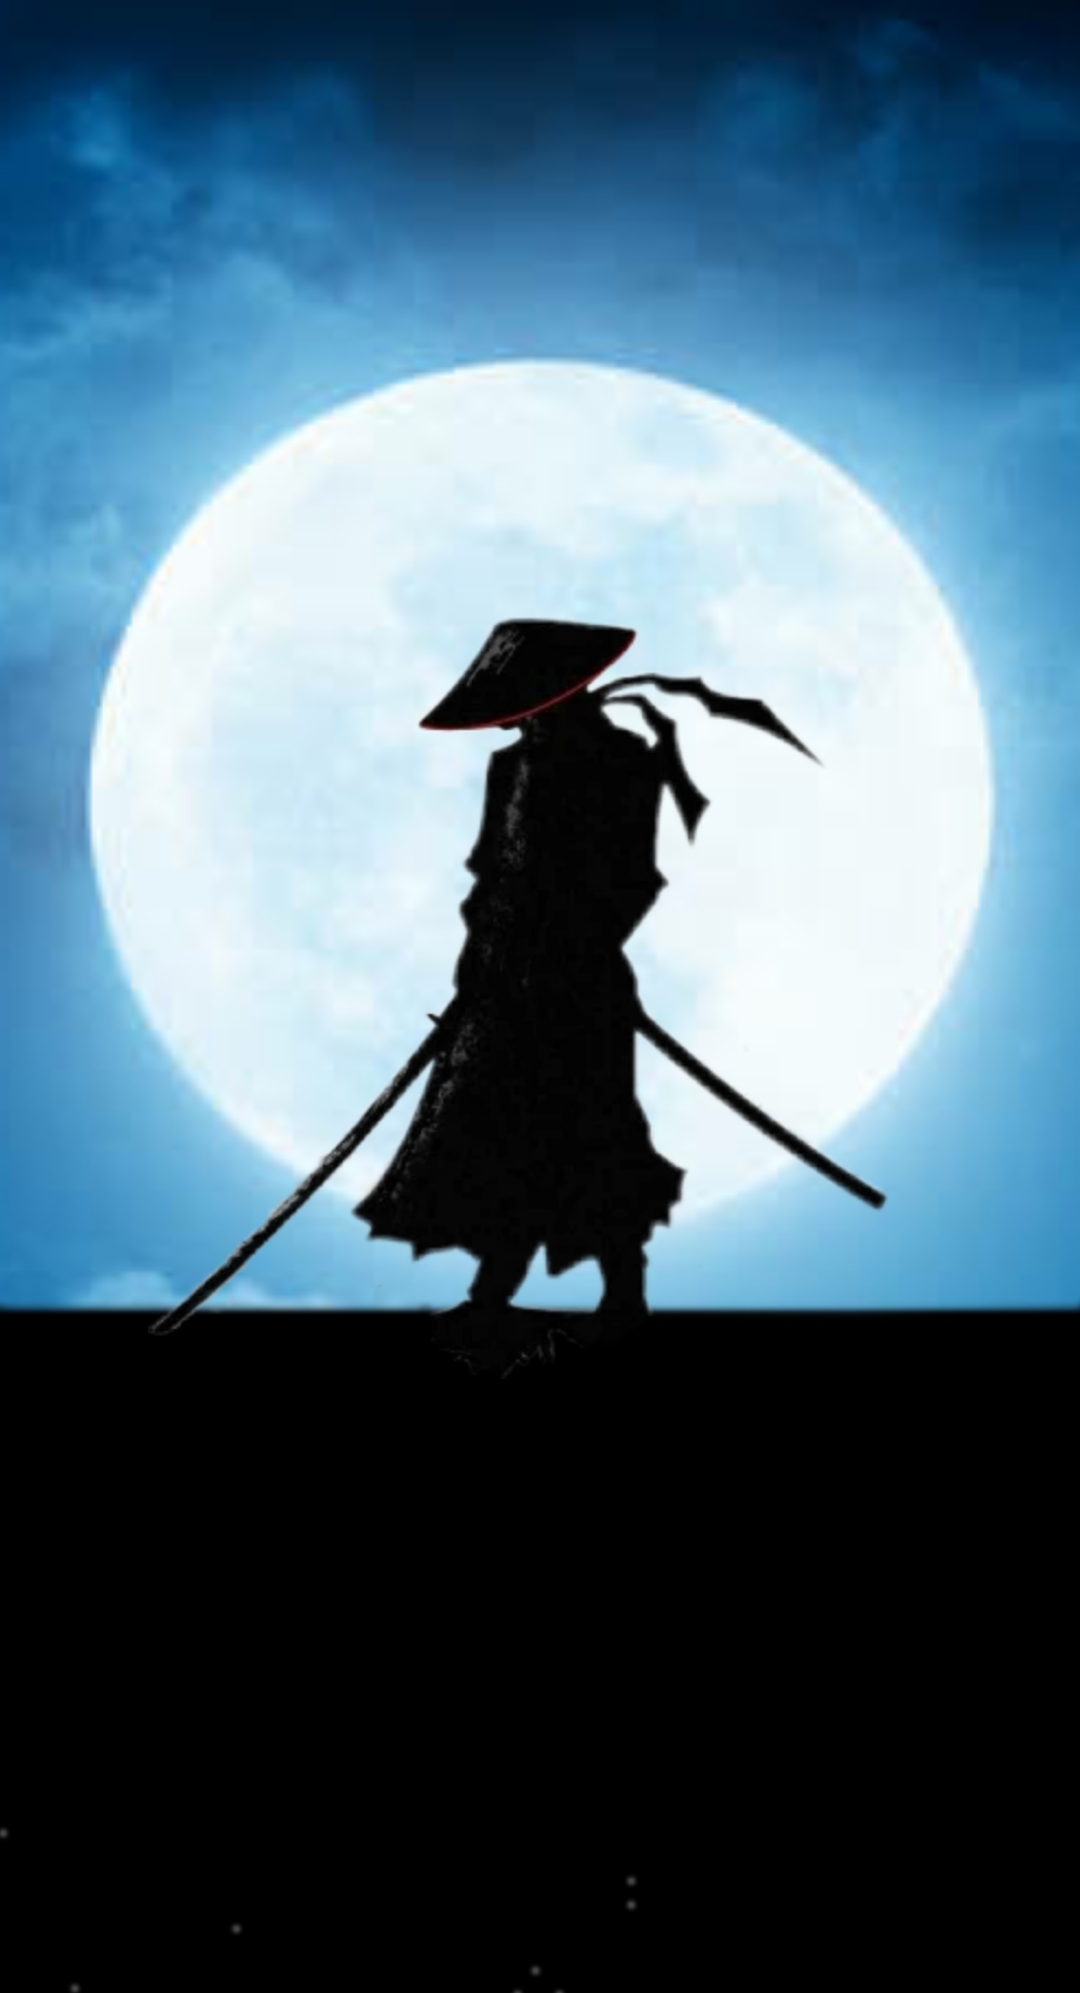 Ninja standing in front of full moon - Image Abyss